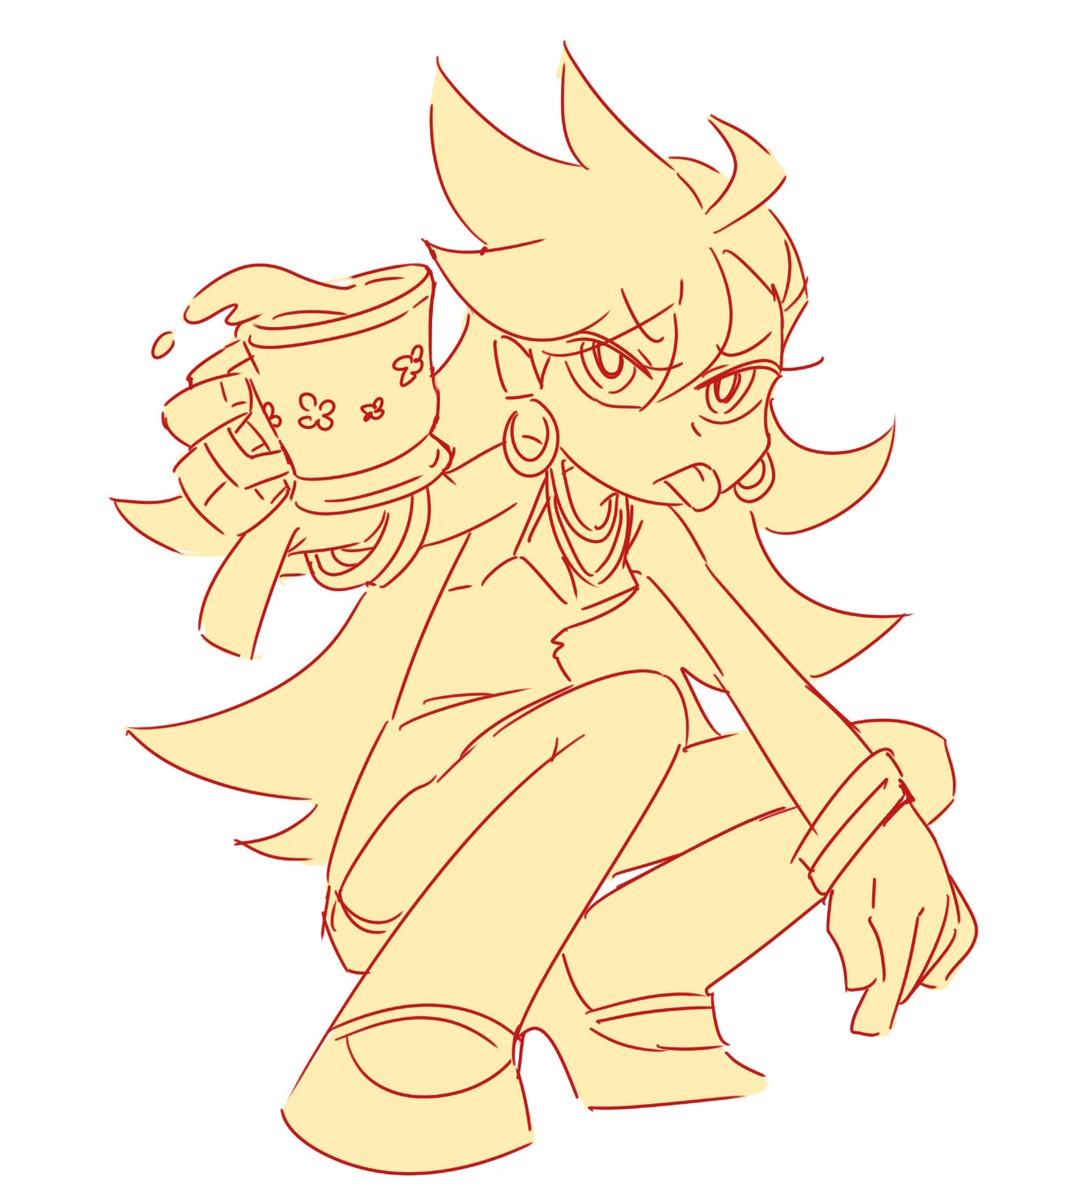 req: 'Panty Anarchy from Panty and Stocking drinking tea all fancy like'